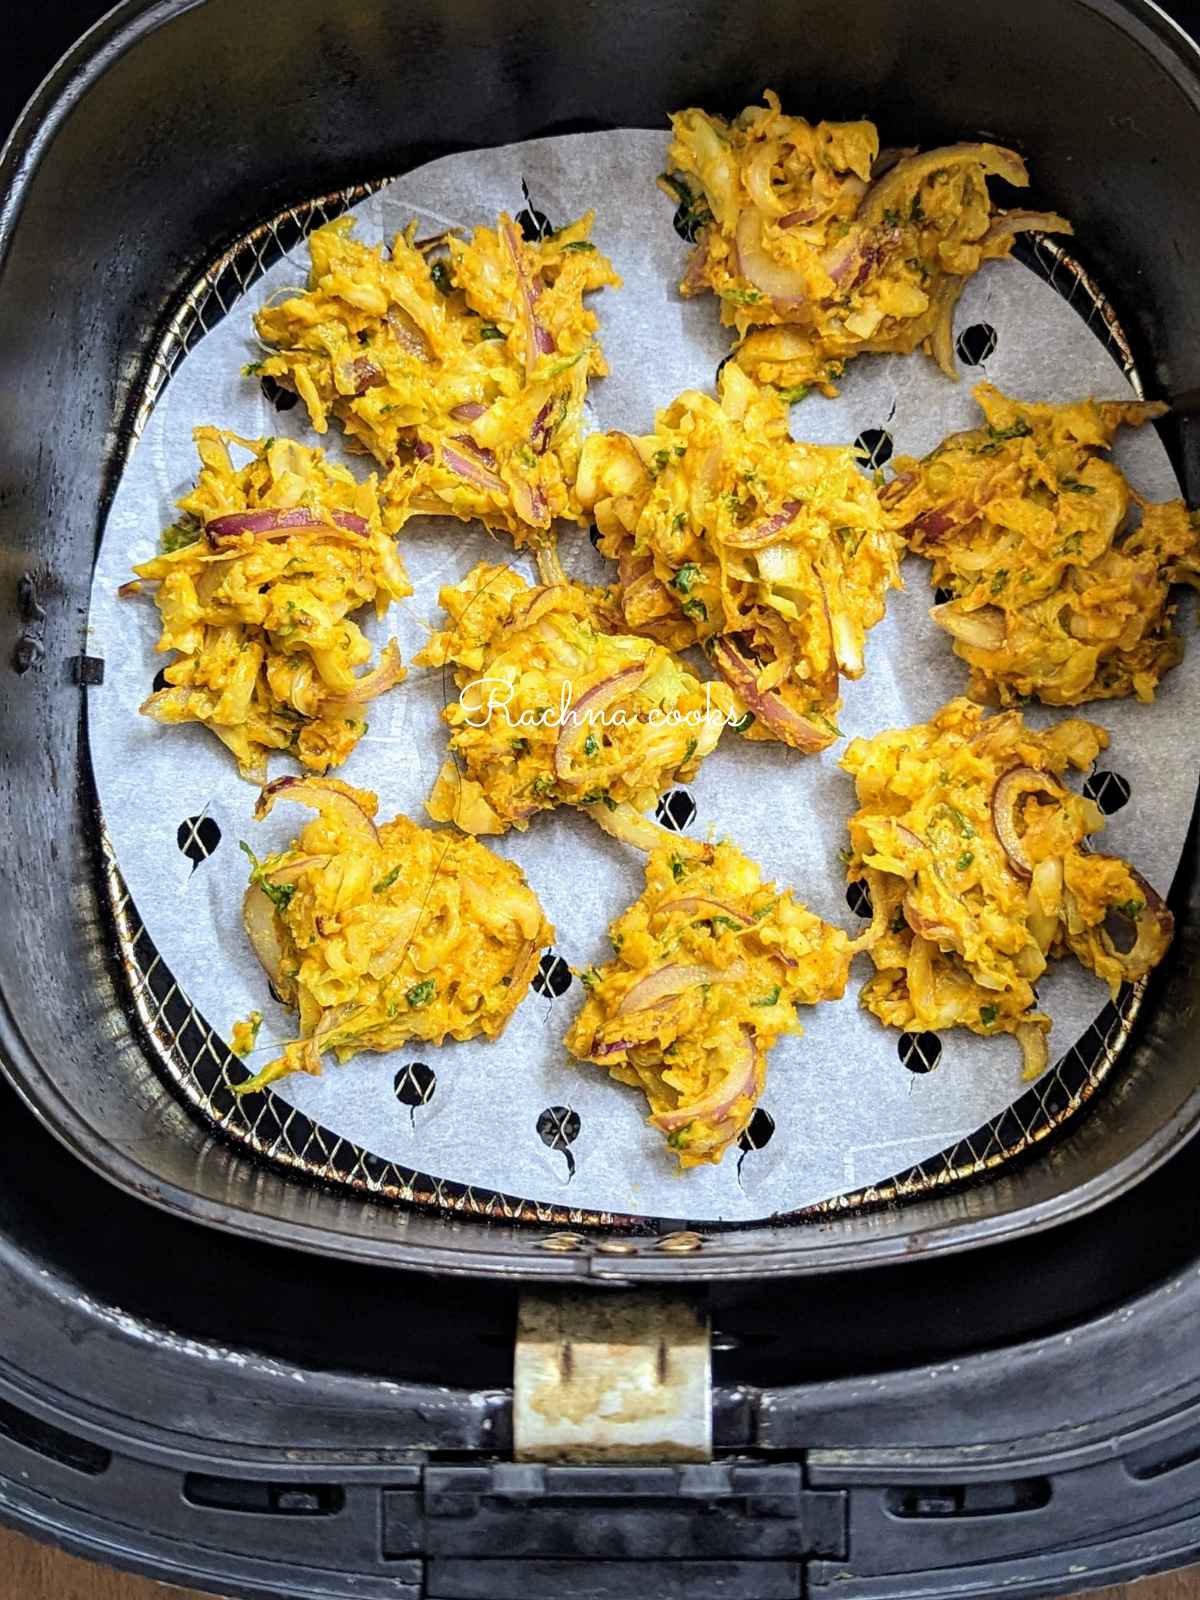 cabbage pakoda placed on perforated parchment paper in air fryer basket ready for air frying.